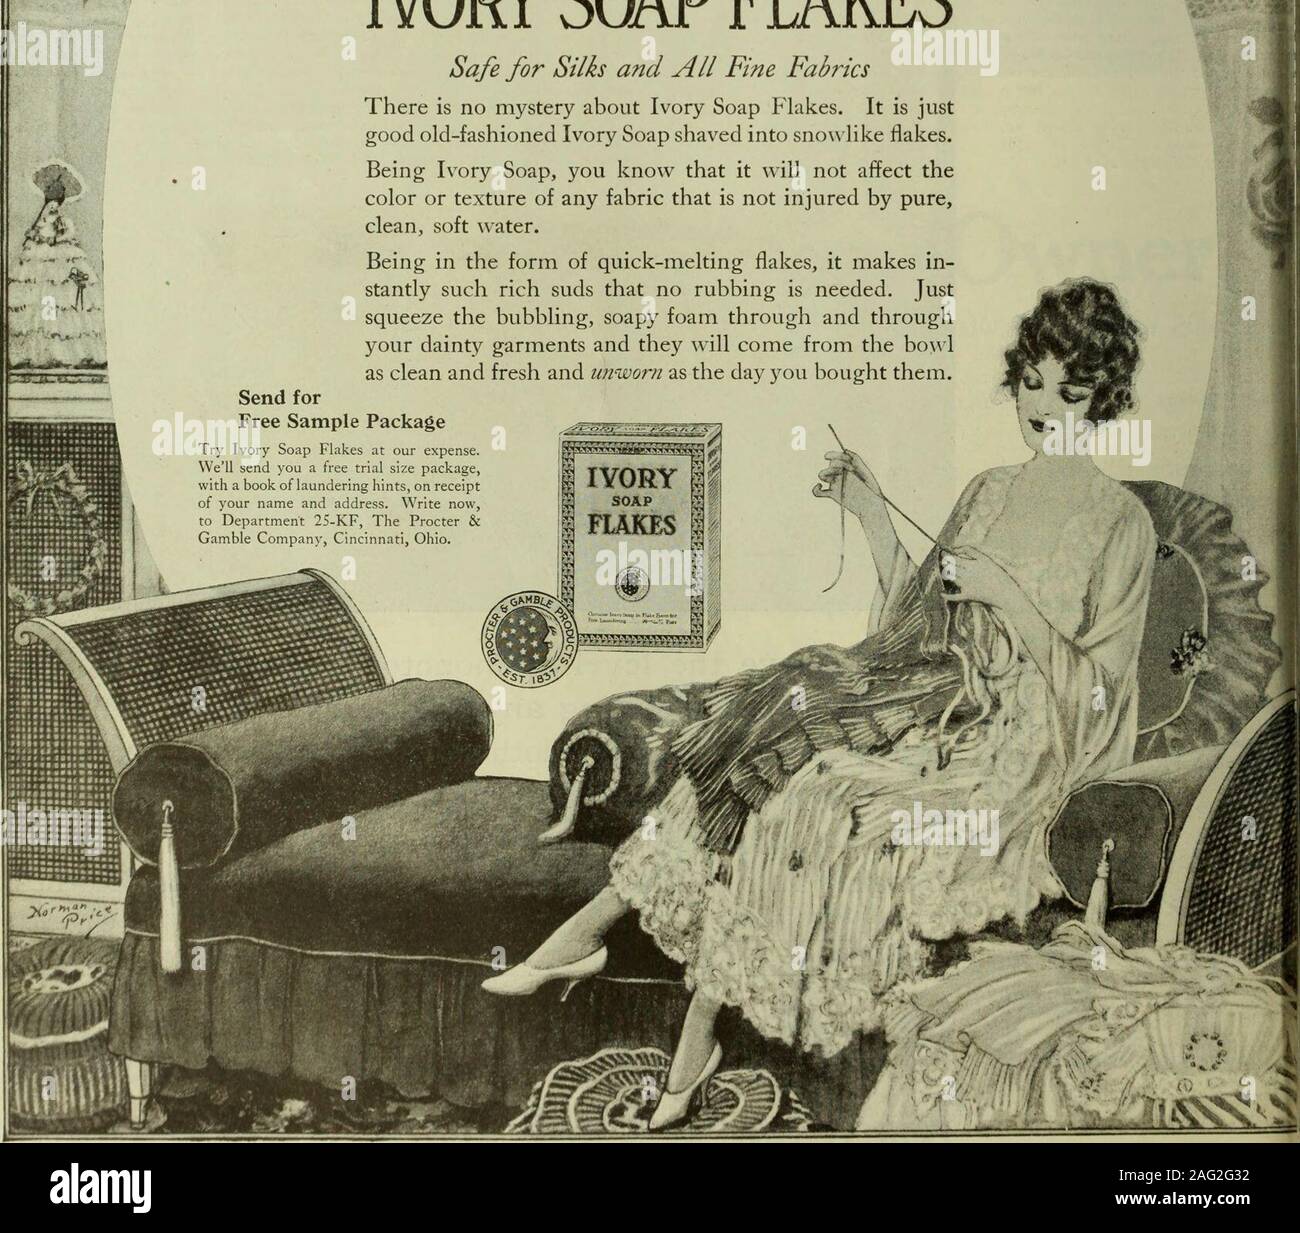 . The Saturday evening post. To keep your fine undert* kingsas pretty as new— wash them, the easy, quick, gentle, safe way, with IvorySoap Flakes. The filmiest chiffons and georgettes come unharmed fromthe huhbling suds. Easy laundering, quick laundering,but above all—safe laundering—is assured by Ivory SoapFlakes. Its use means a longer life of loveliness for yournicest things. IVORY SOAP FLAKES Safe for Silks and All Fine Fabrics There is no mystery about Ivory Soap Flakes. It is justgood old-fashioned Ivory Soap shaved into snowlike flakes. Being Ivory Soap, you know that it will not affect Stock Photo